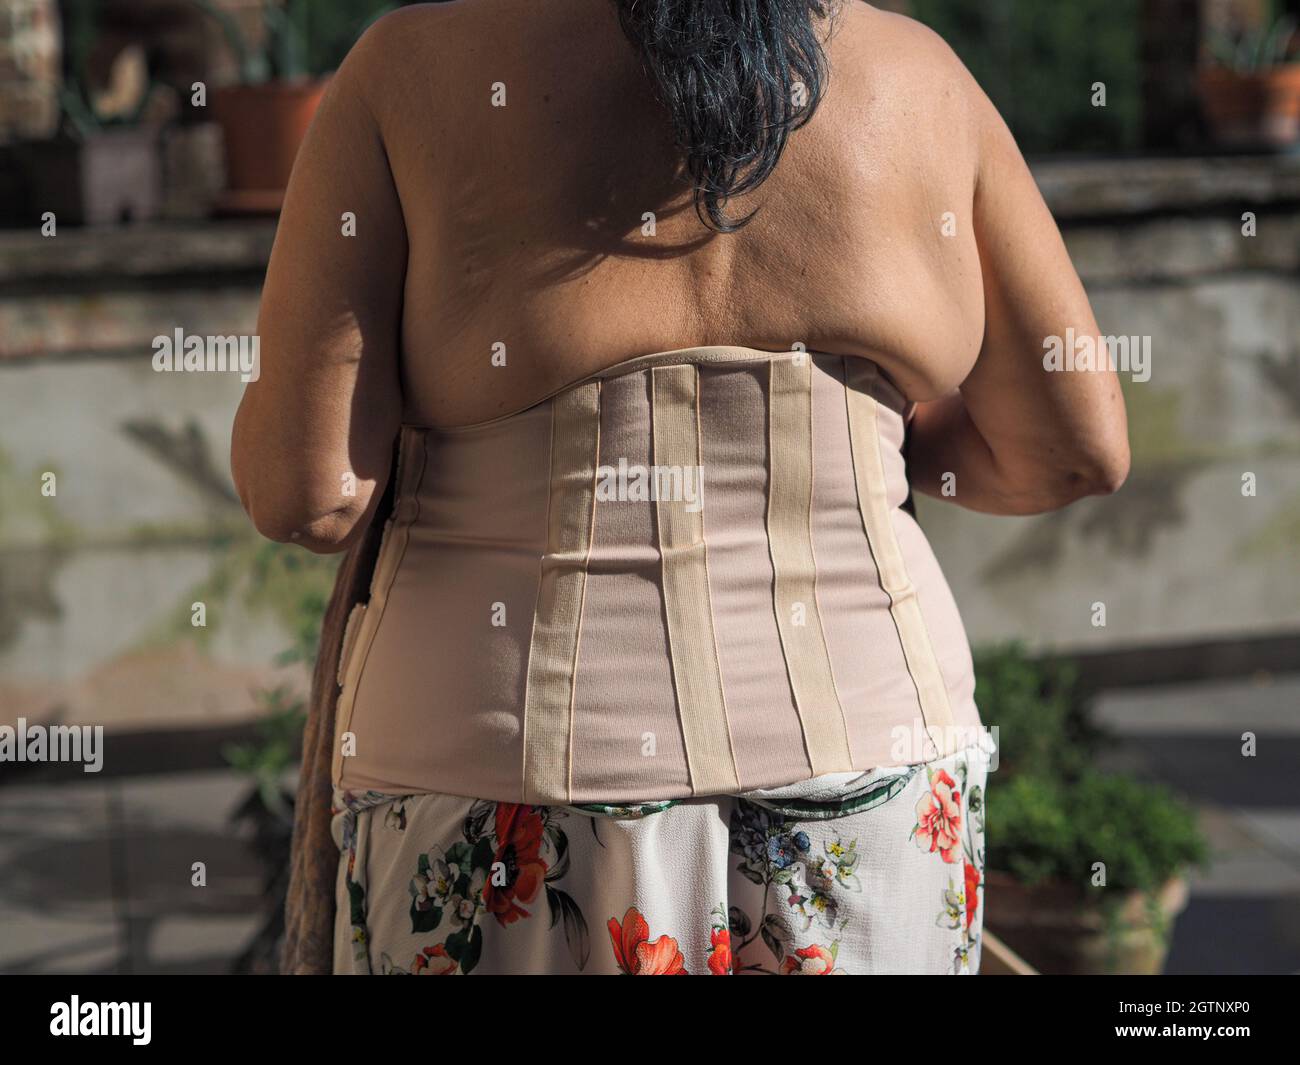 Lumbosacral High Resolution Stock Photography and Images - Alamy